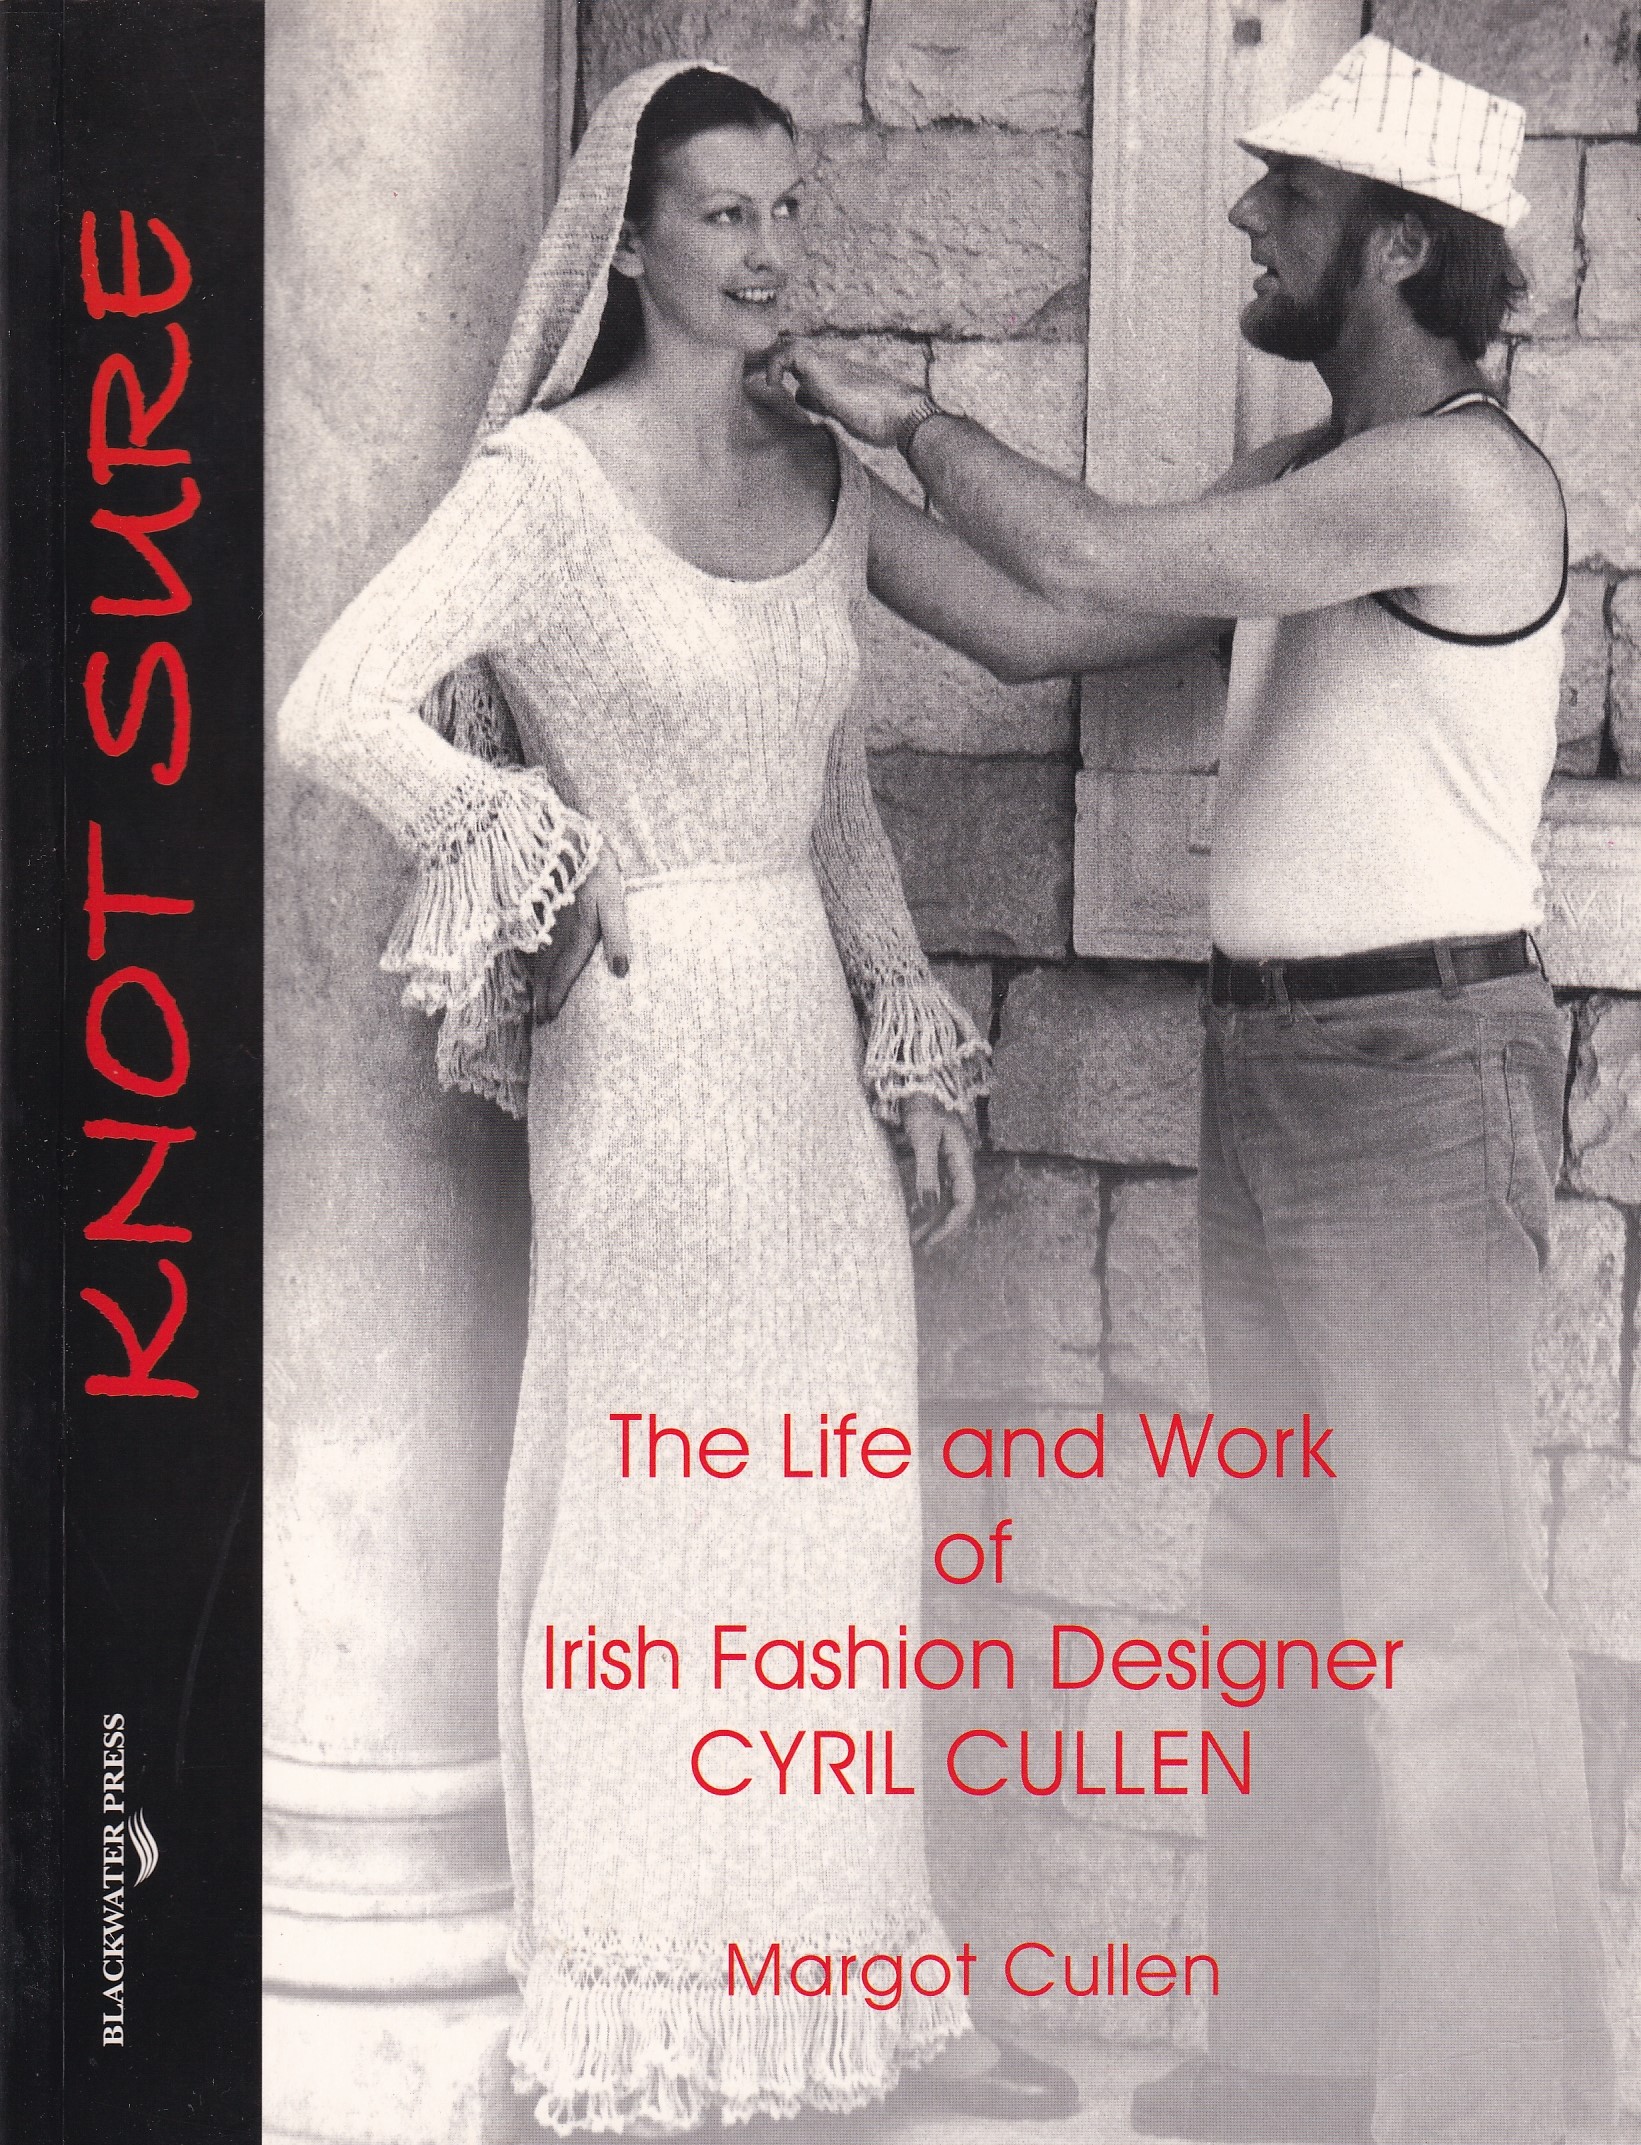 Knot Sure: The Life and Work of Irish Fashion Designer Cyril Cullen | Margot Cullen | Charlie Byrne's